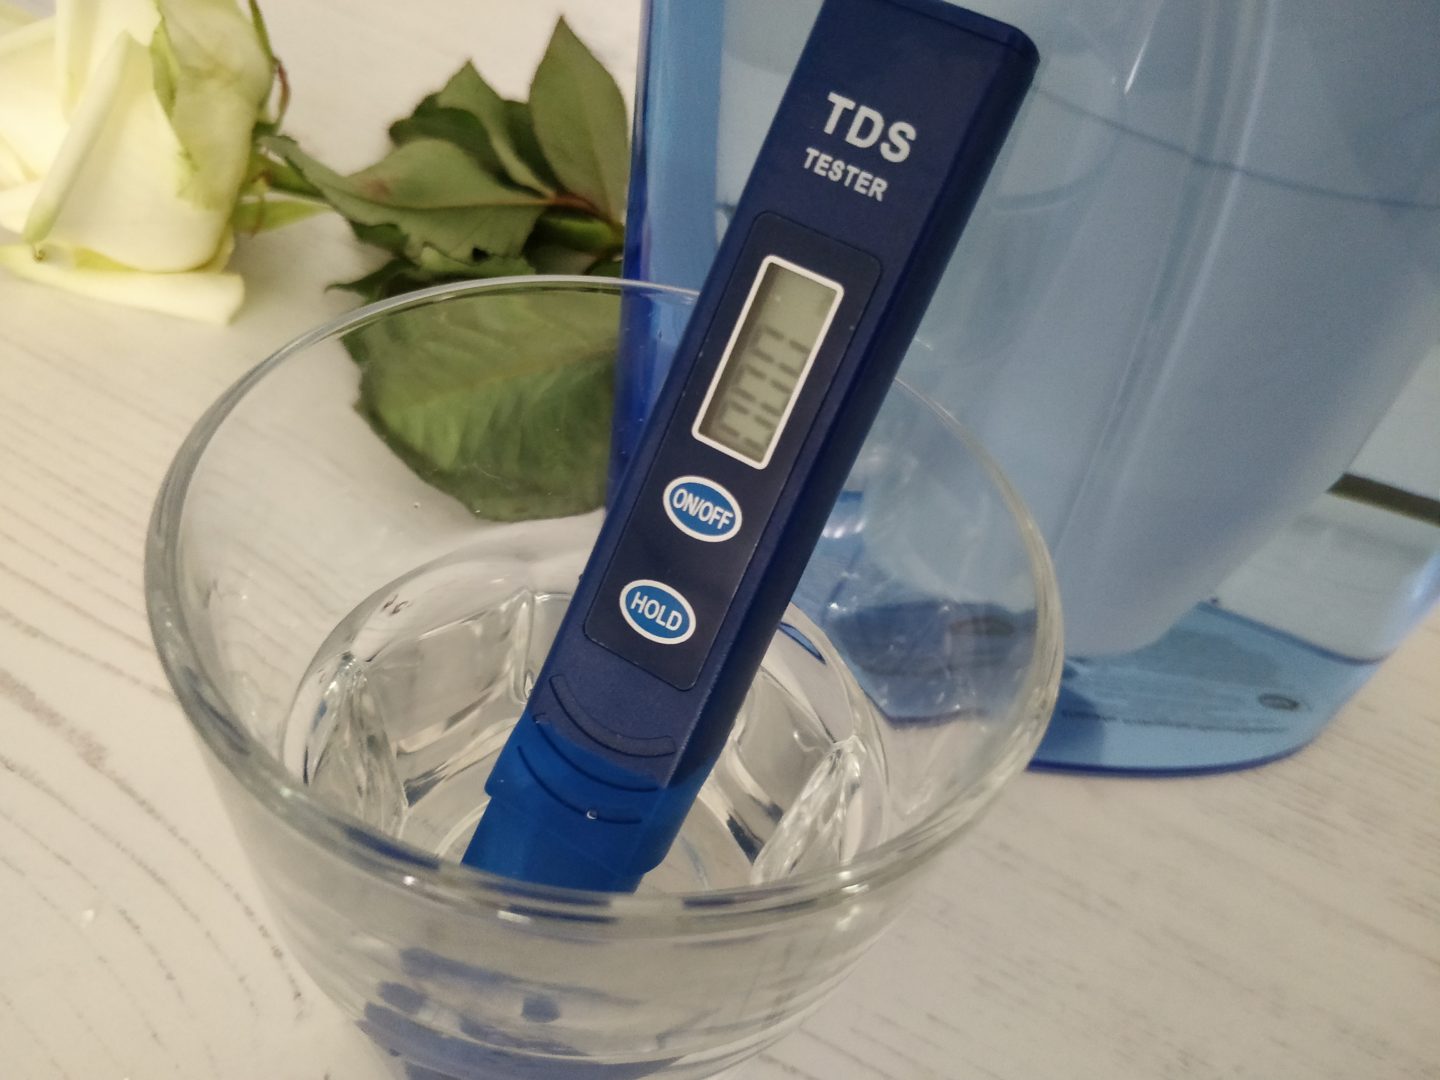 ZeroWater Filter TDS quality meter measure after filtering